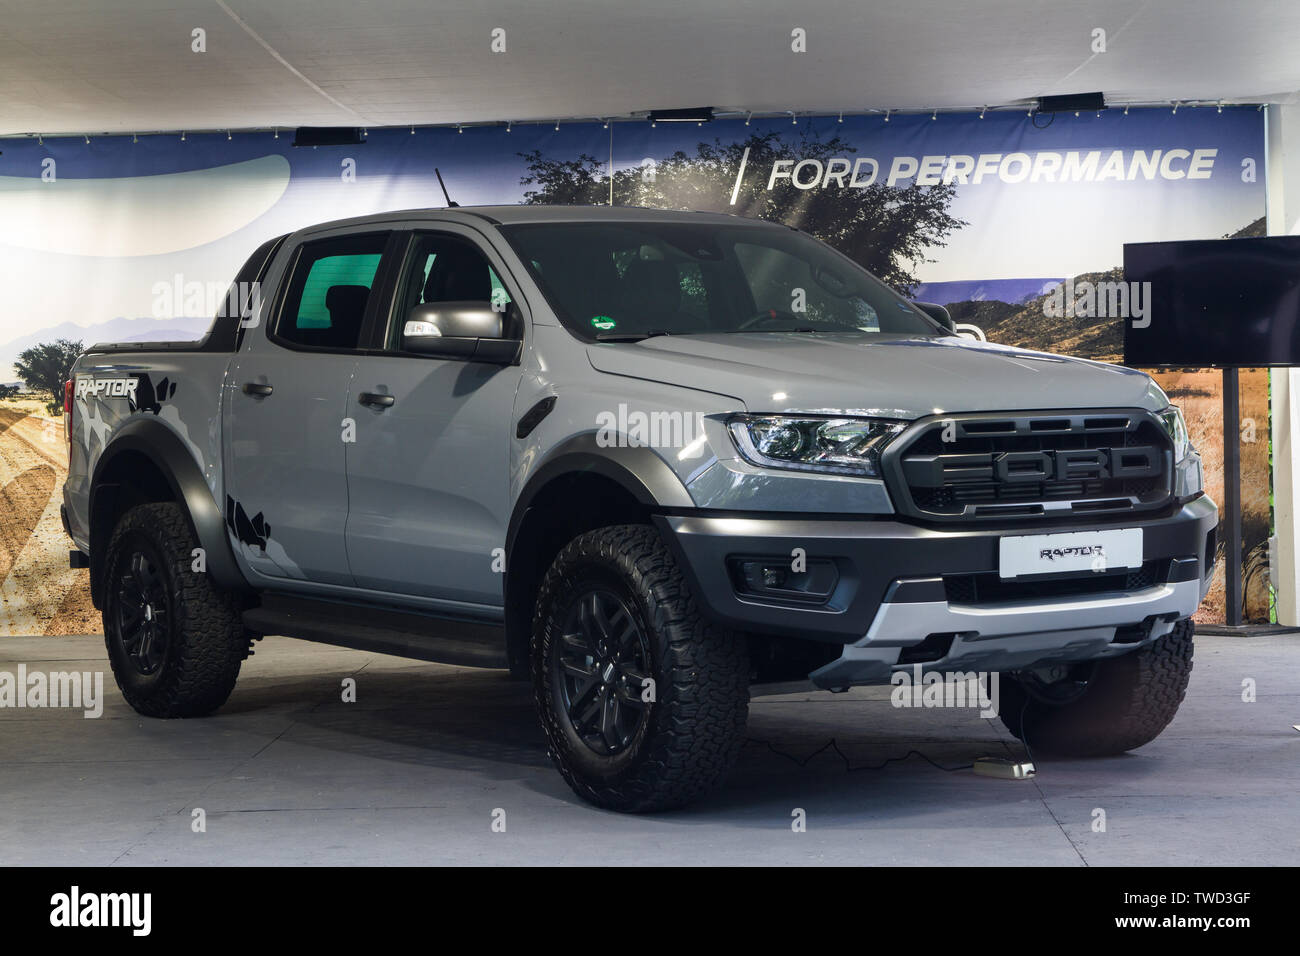 A Ford Ranger Raptor 2019 Edition Of Parco Valentino Car